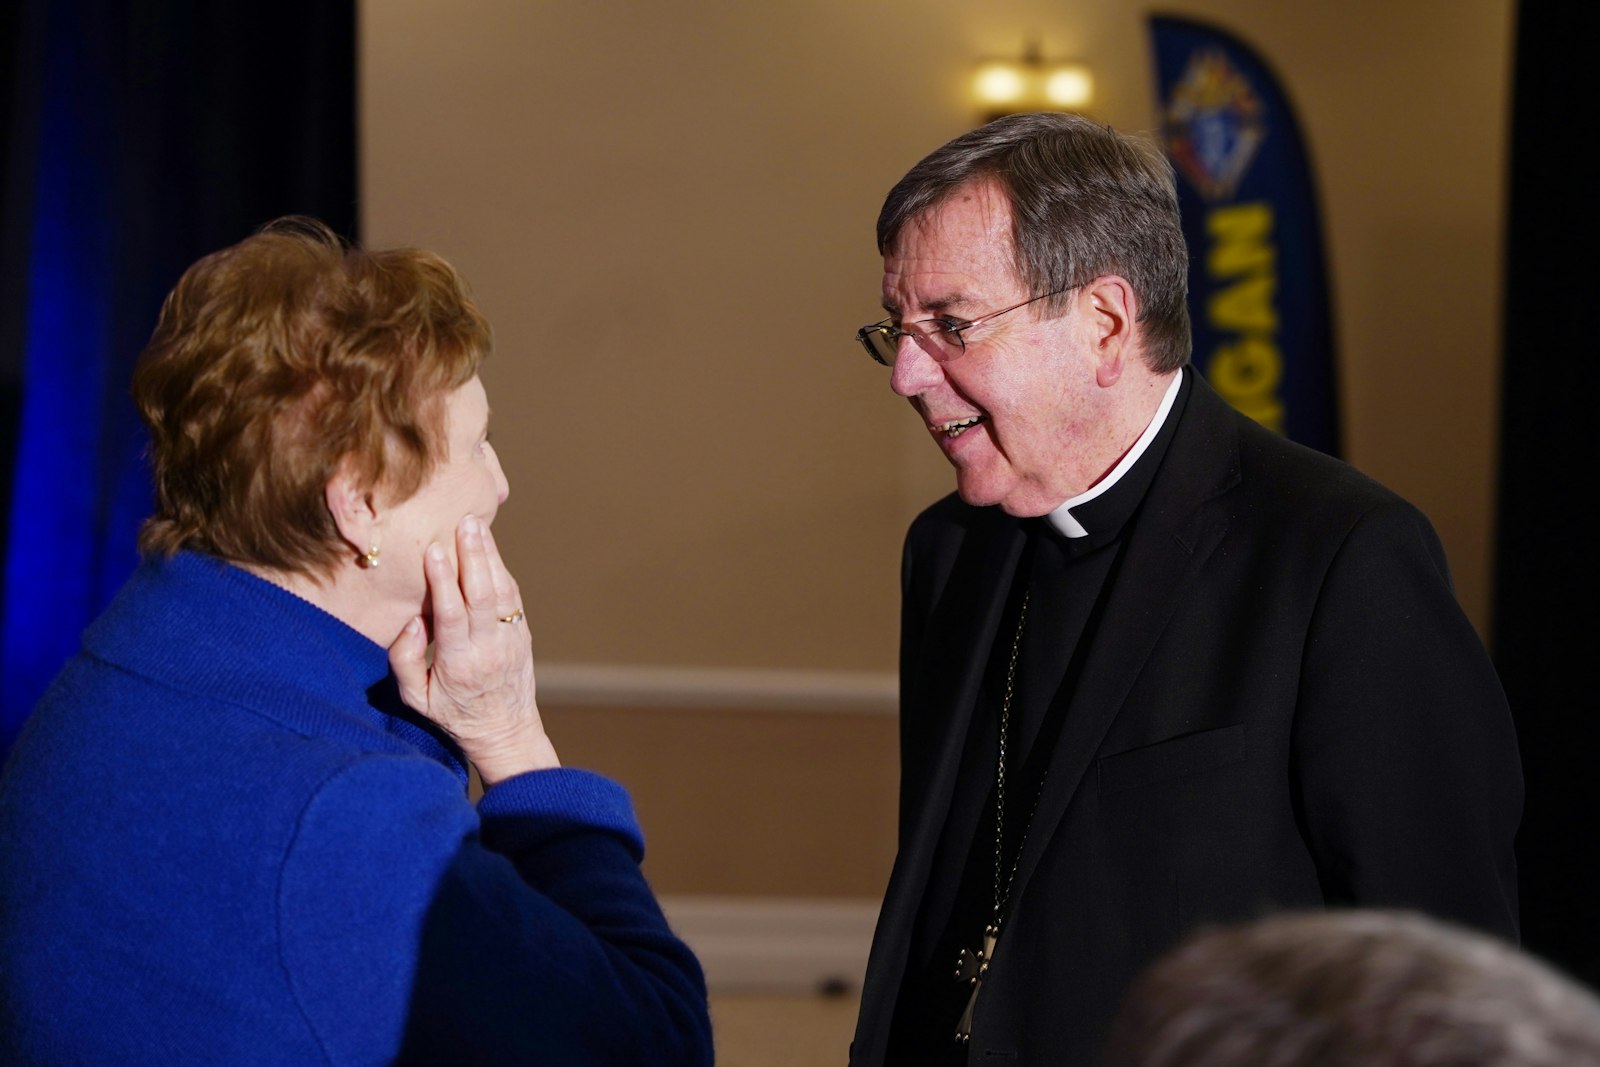 Listing, left, talks with Detroit Archbishop Allen H. Vigneron during the 45th annual Respect Life Benefit Dinner at the San Marino Club in Troy on April 19, 2023. Listing joined Right to Life of Michigan in 1973, shortly after the U.S. Supreme Court decided Roe v. Wade and led the organization through Roe's overturning in the 2022 Dobbs vs. Jackson Women's Health Clinic decision. (Daniel Meloy | Detroit Catholic)